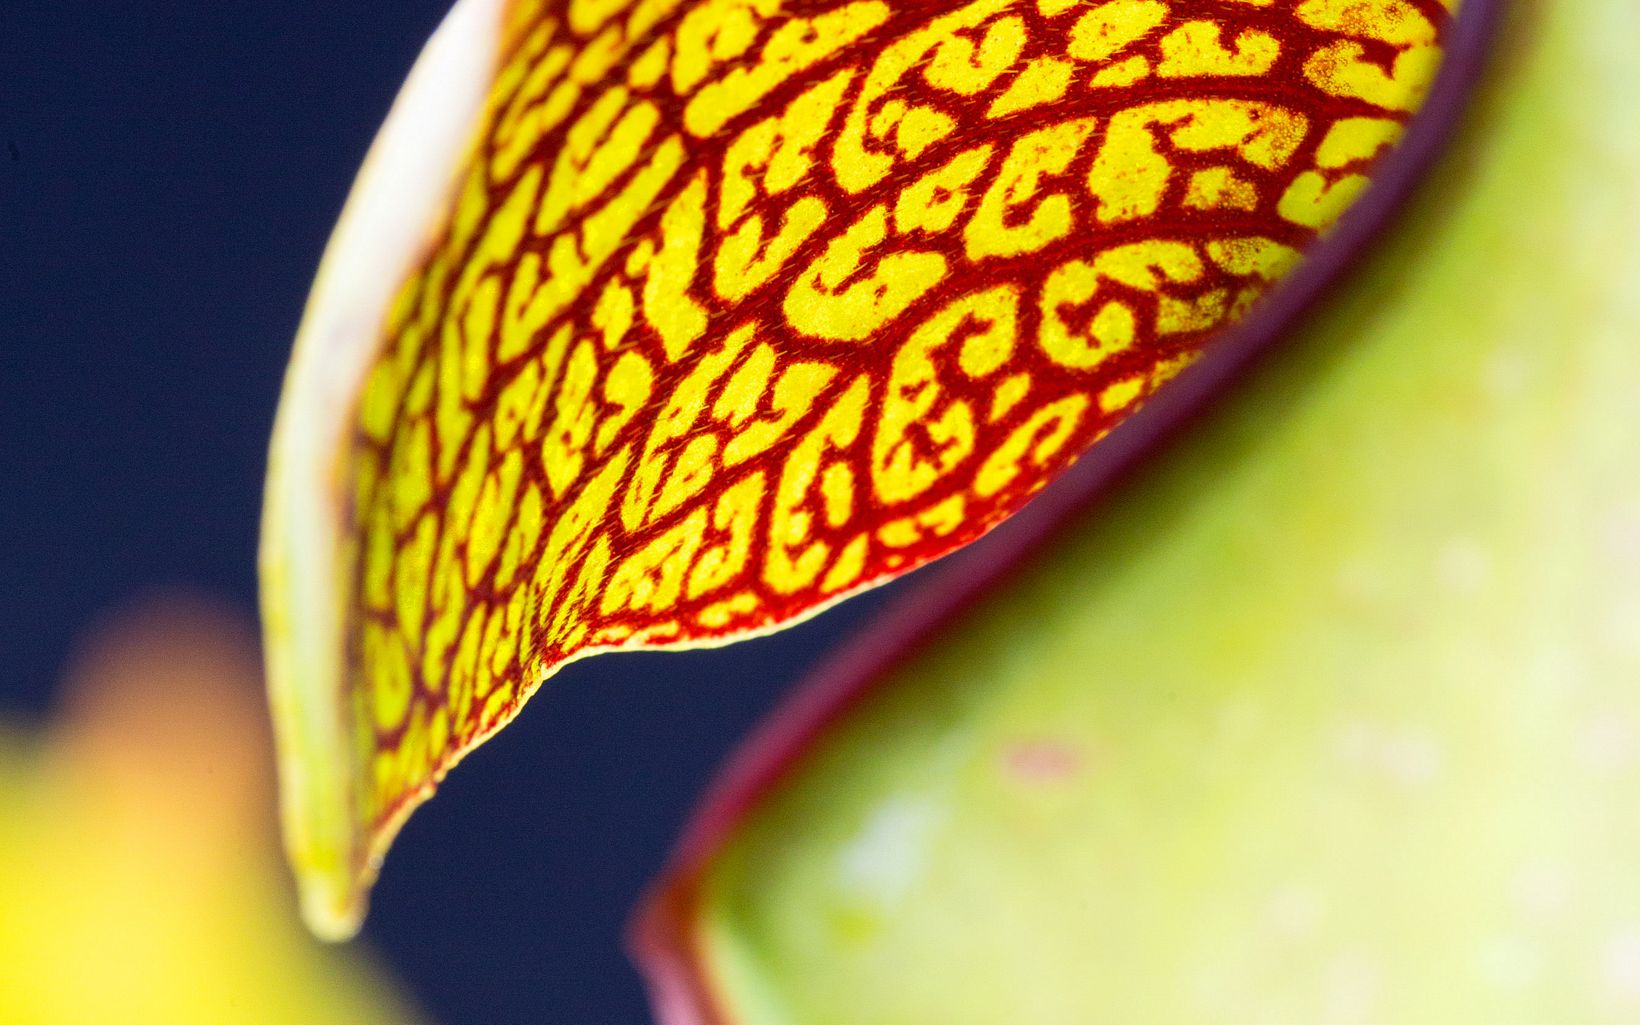 Extreme closeup of a pitcher plant pitcher with red lines on a green background.